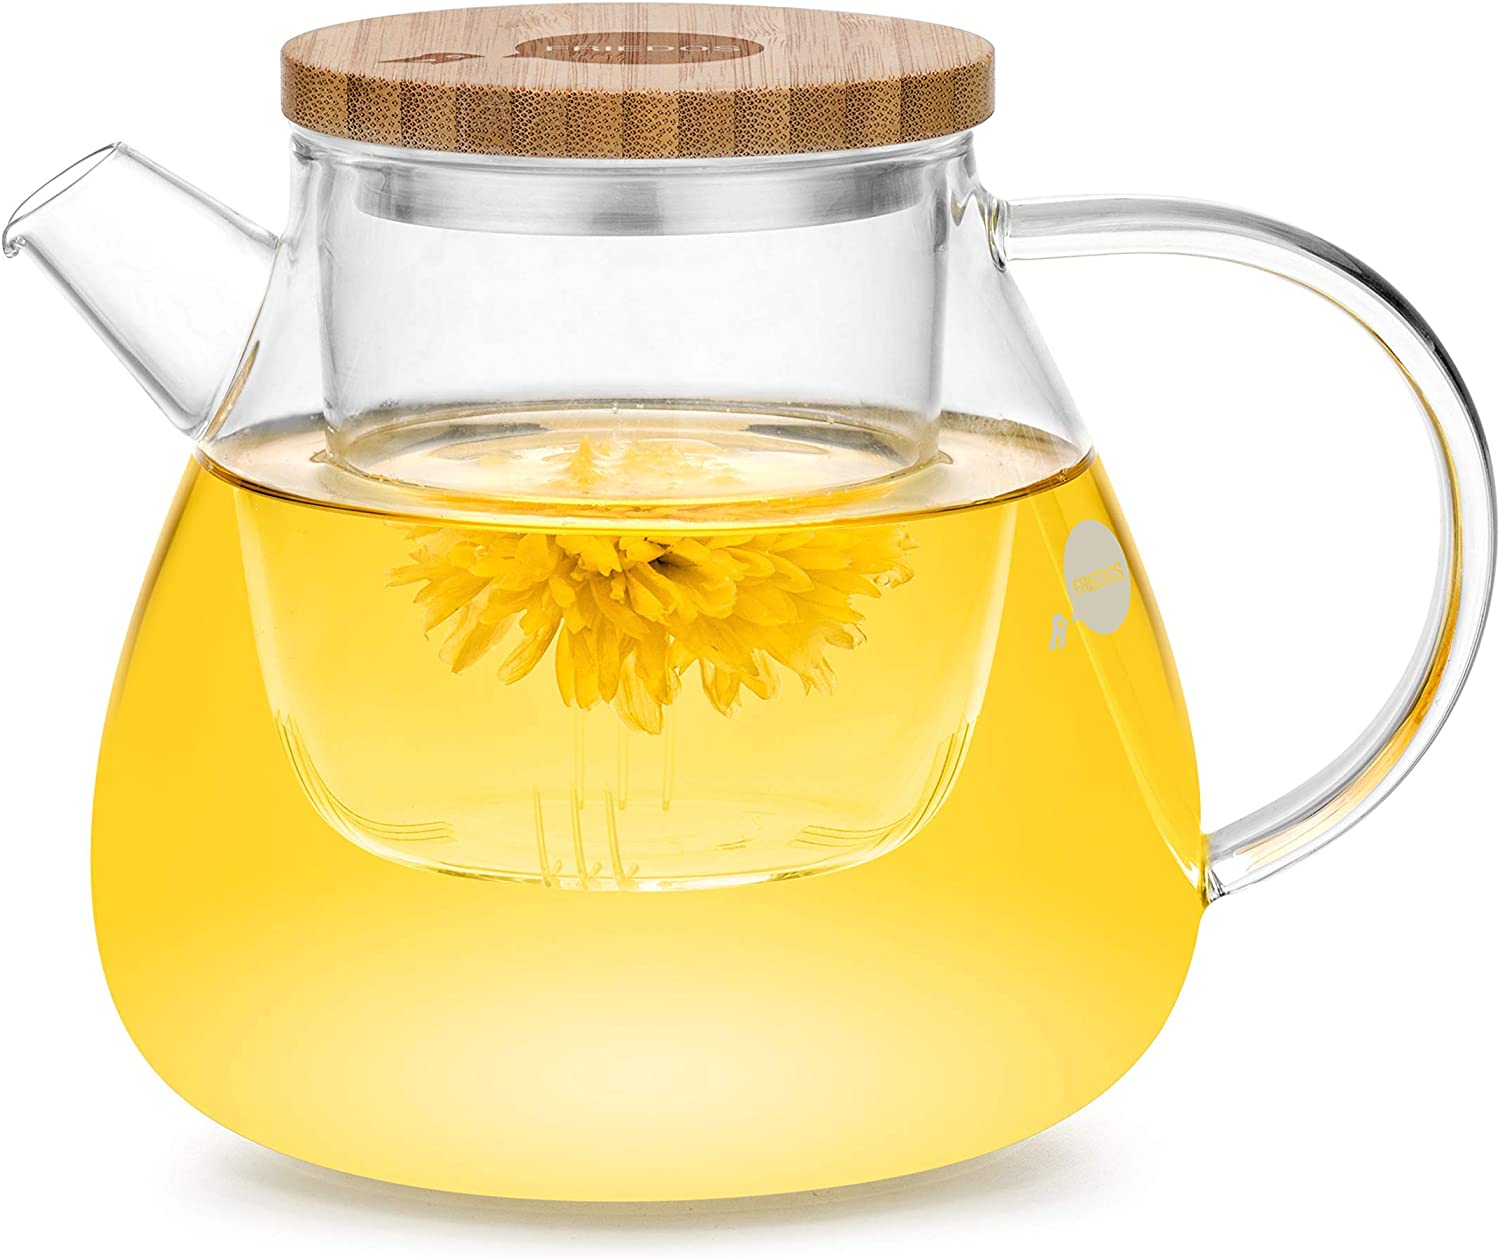 Friedos Tea - Glass Teapot with Strainer Insert and Lid - 900 ml Capacity for Loose Tea or Bags - Glass Jug Made of Borosilicate Glass with Strainer up to 130 °C - 900 ml Volume